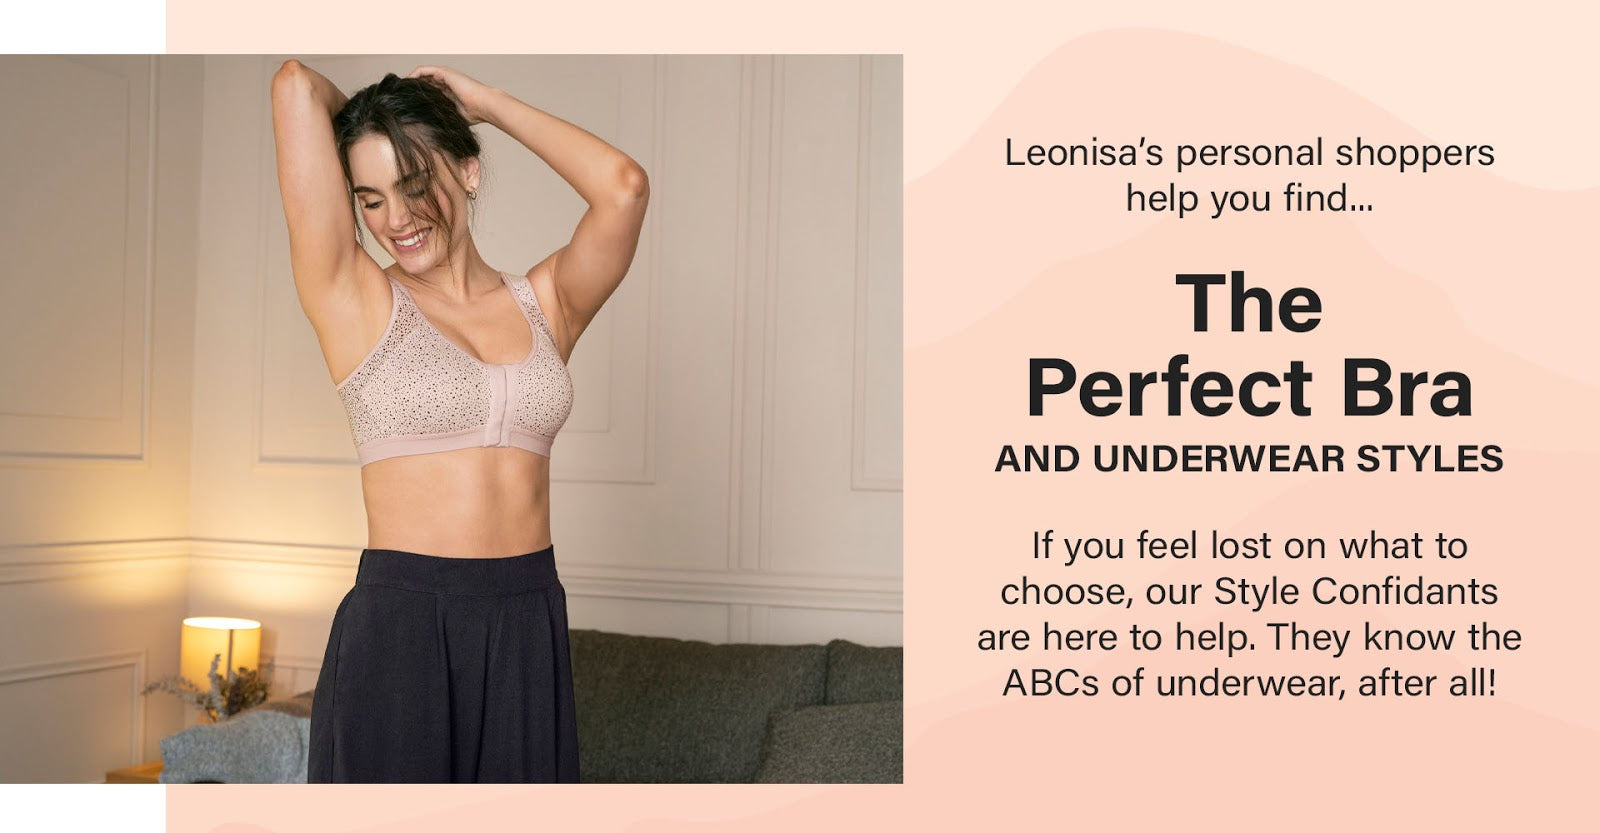 Find the Perfect Bra and Underwear Styles - Leonisa